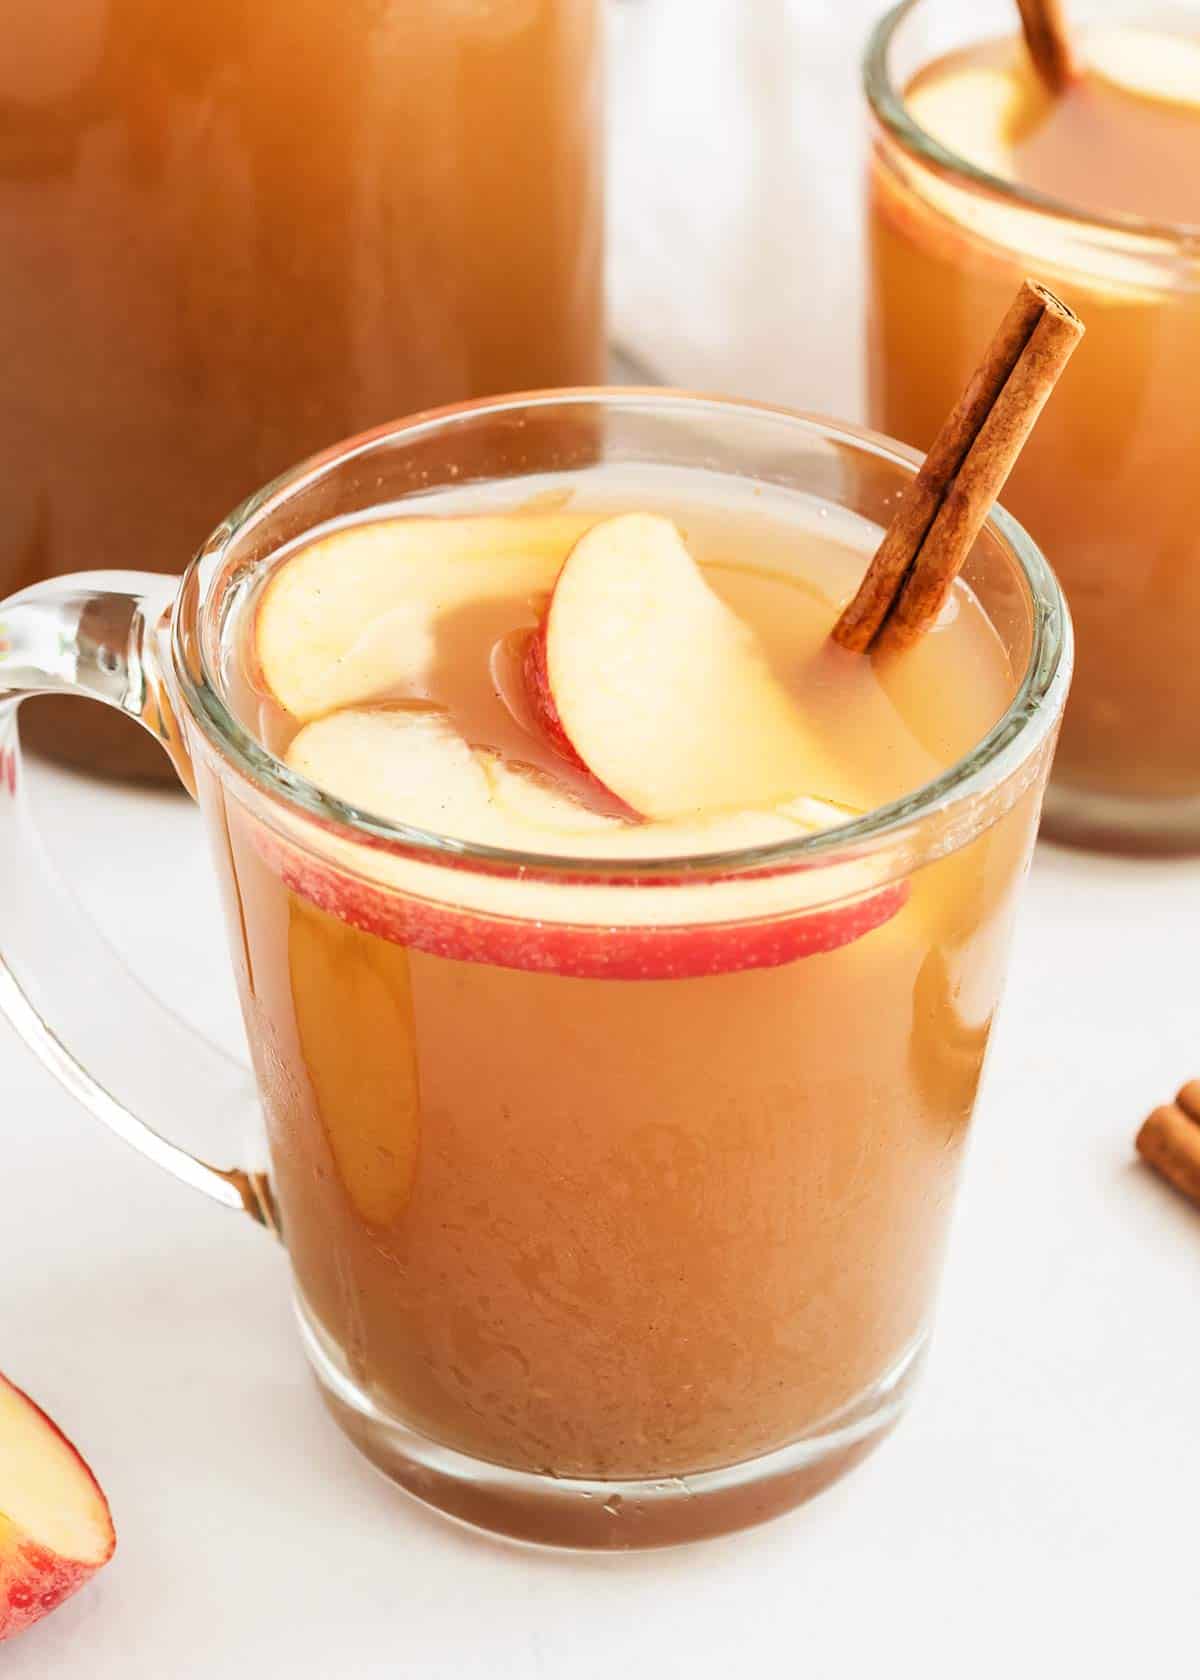 Homemade apple cider in glass cup with apples and cinnamon stick.